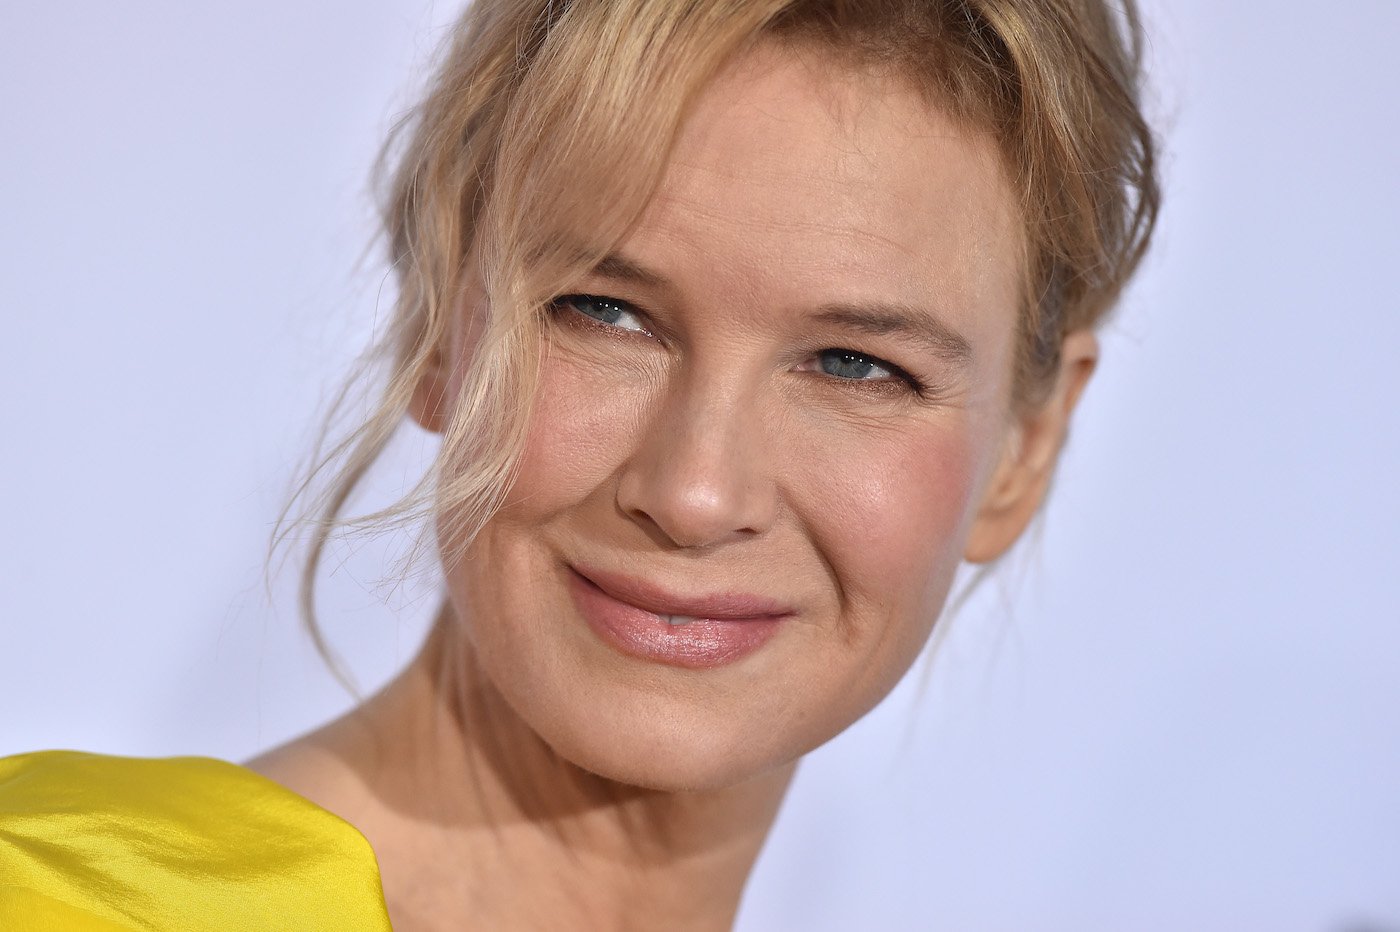 Renée Zellweger Says She Once Stepped Away From Acting and ‘Snuck Into’ College